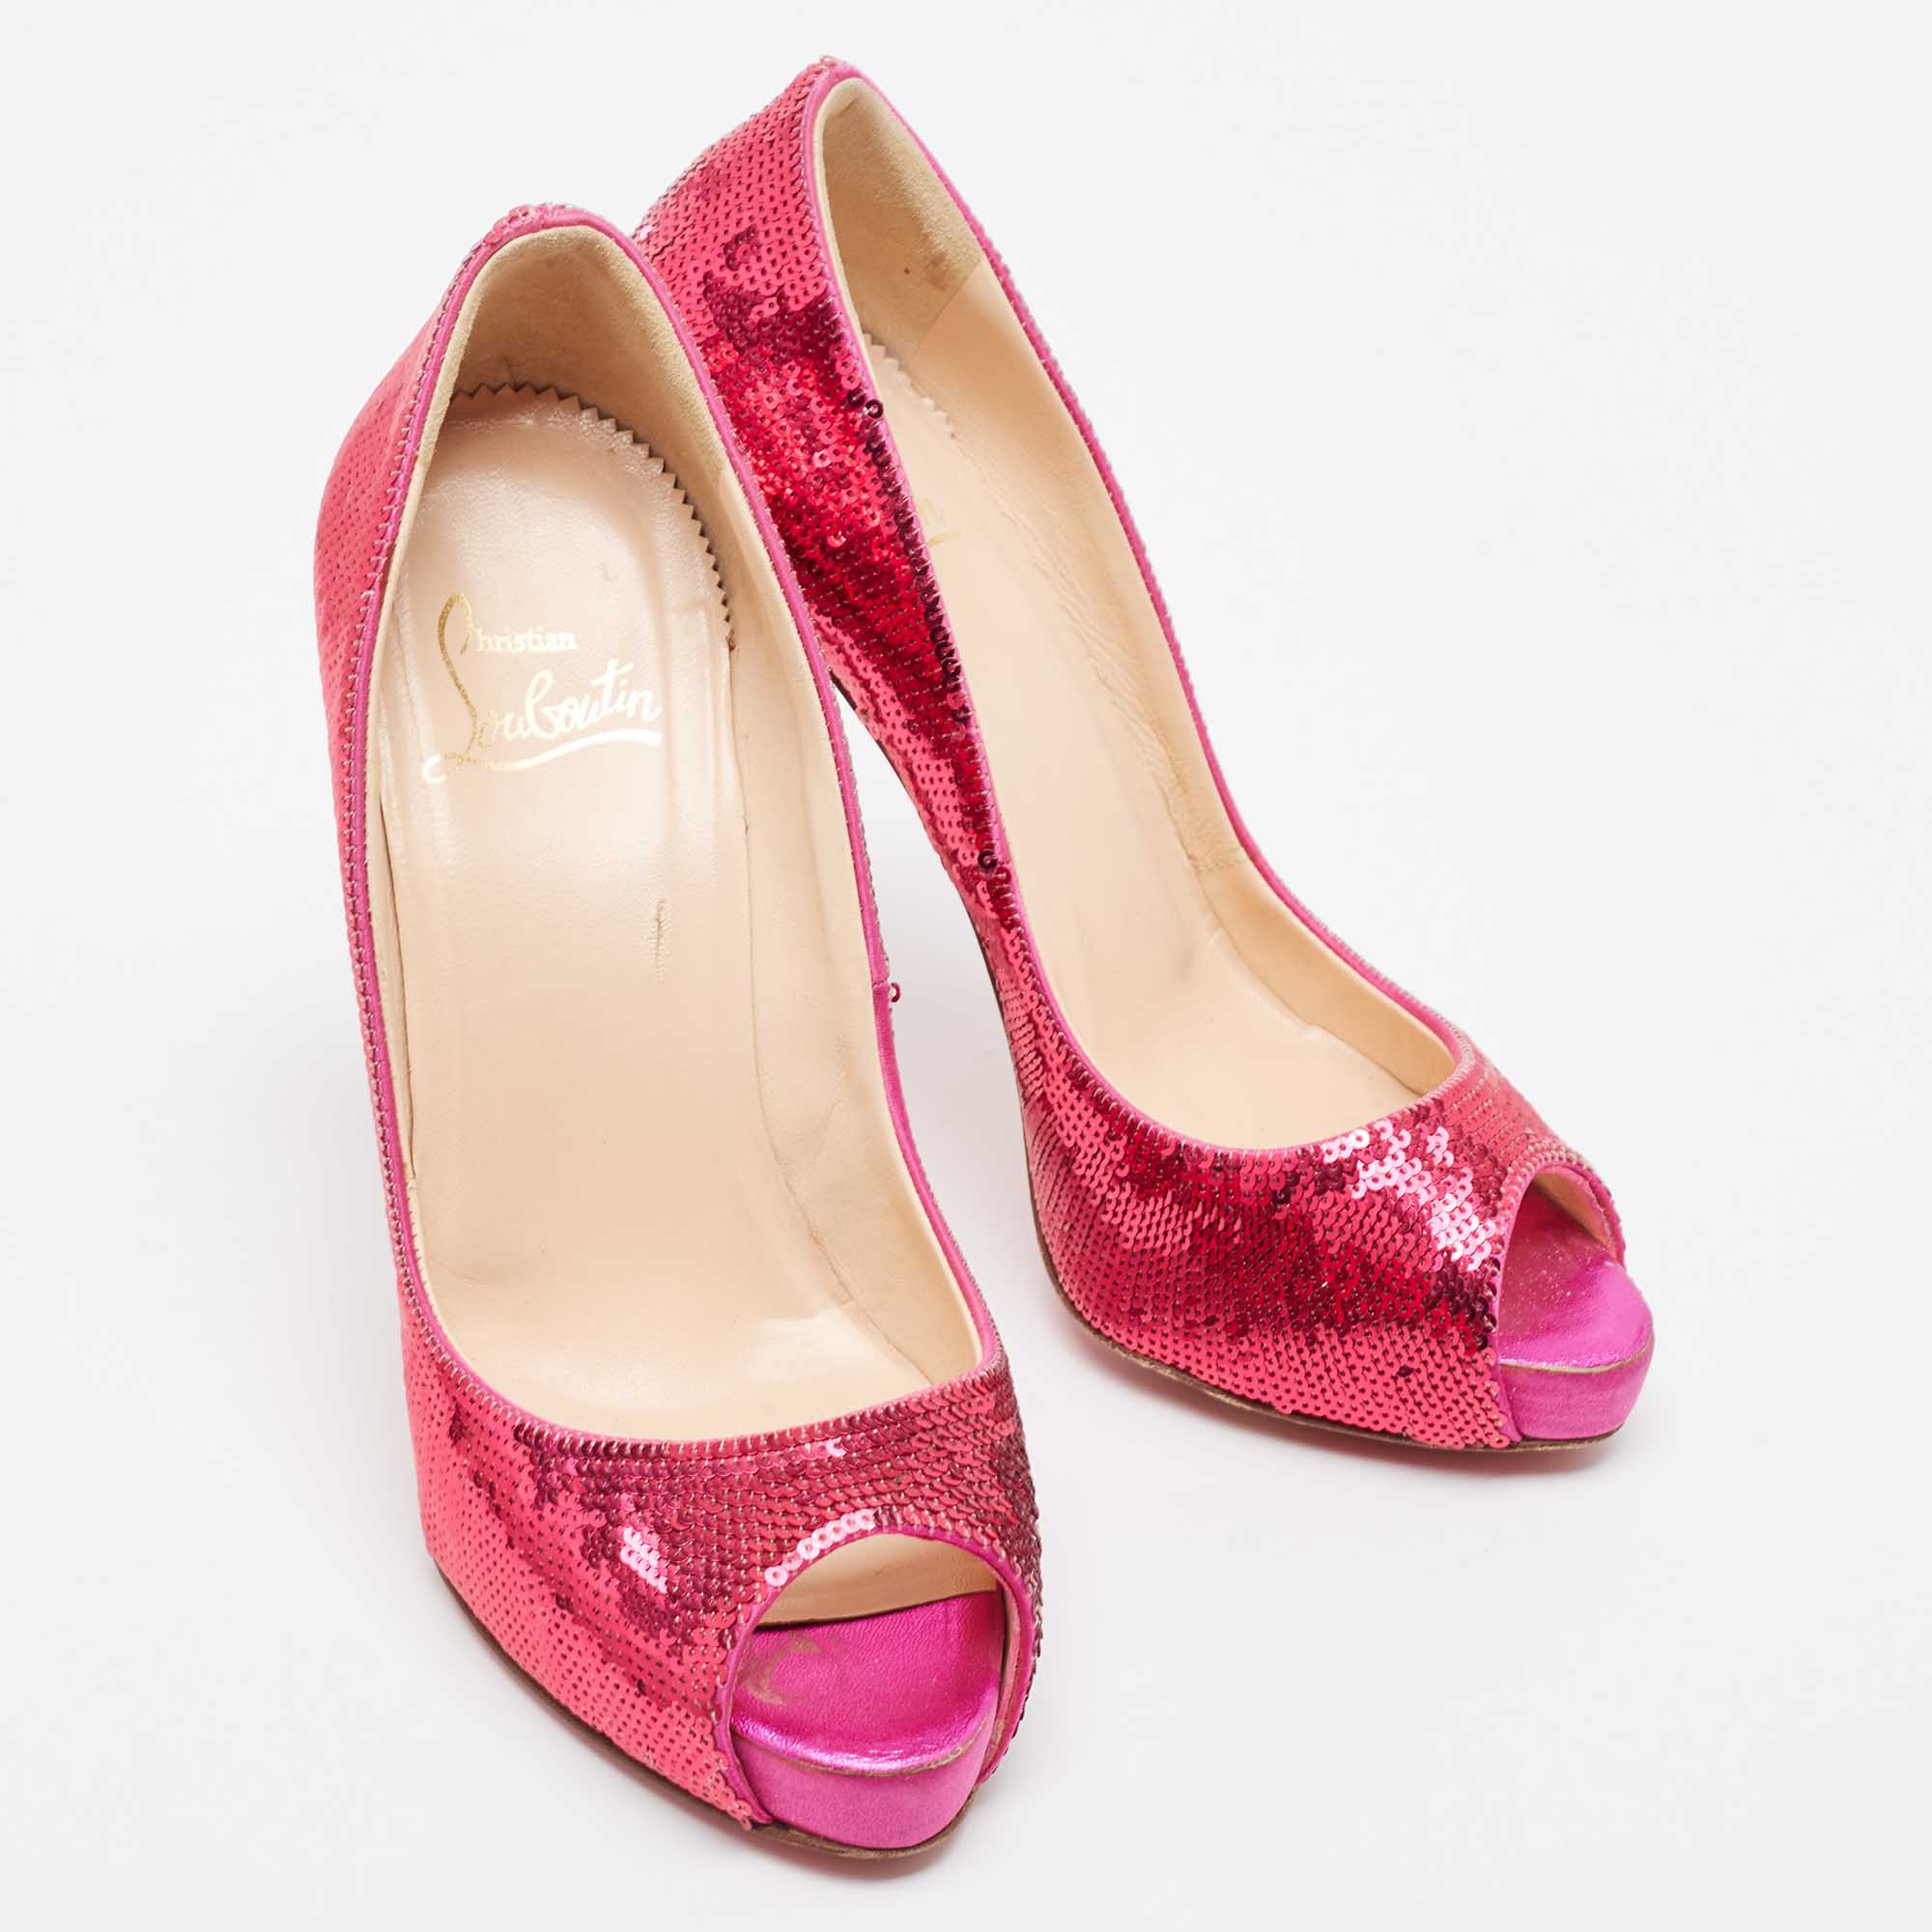 Christian Louboutin Pink Sequin Very Prive Pumps Size 37